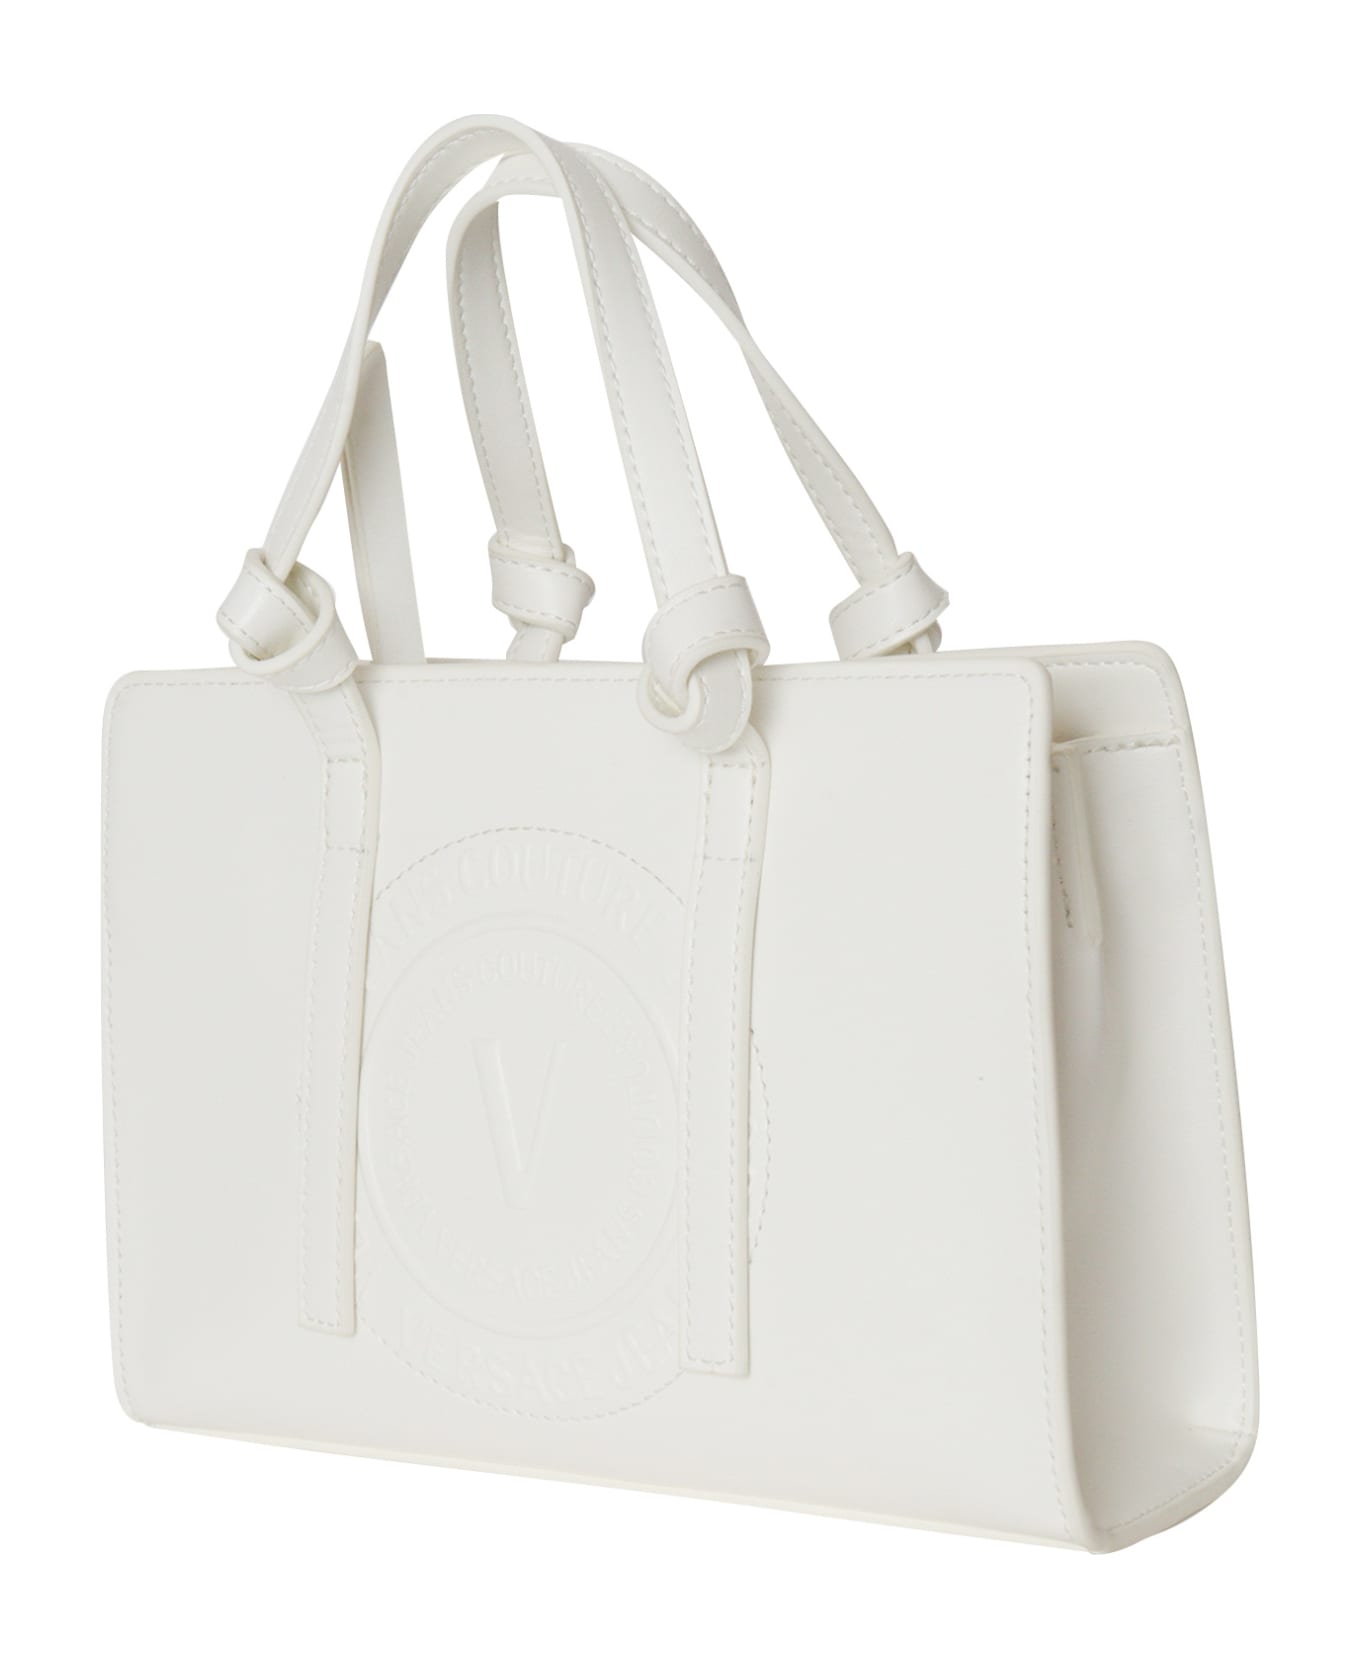 Versace Jeans Couture Tote Bag - WHITE